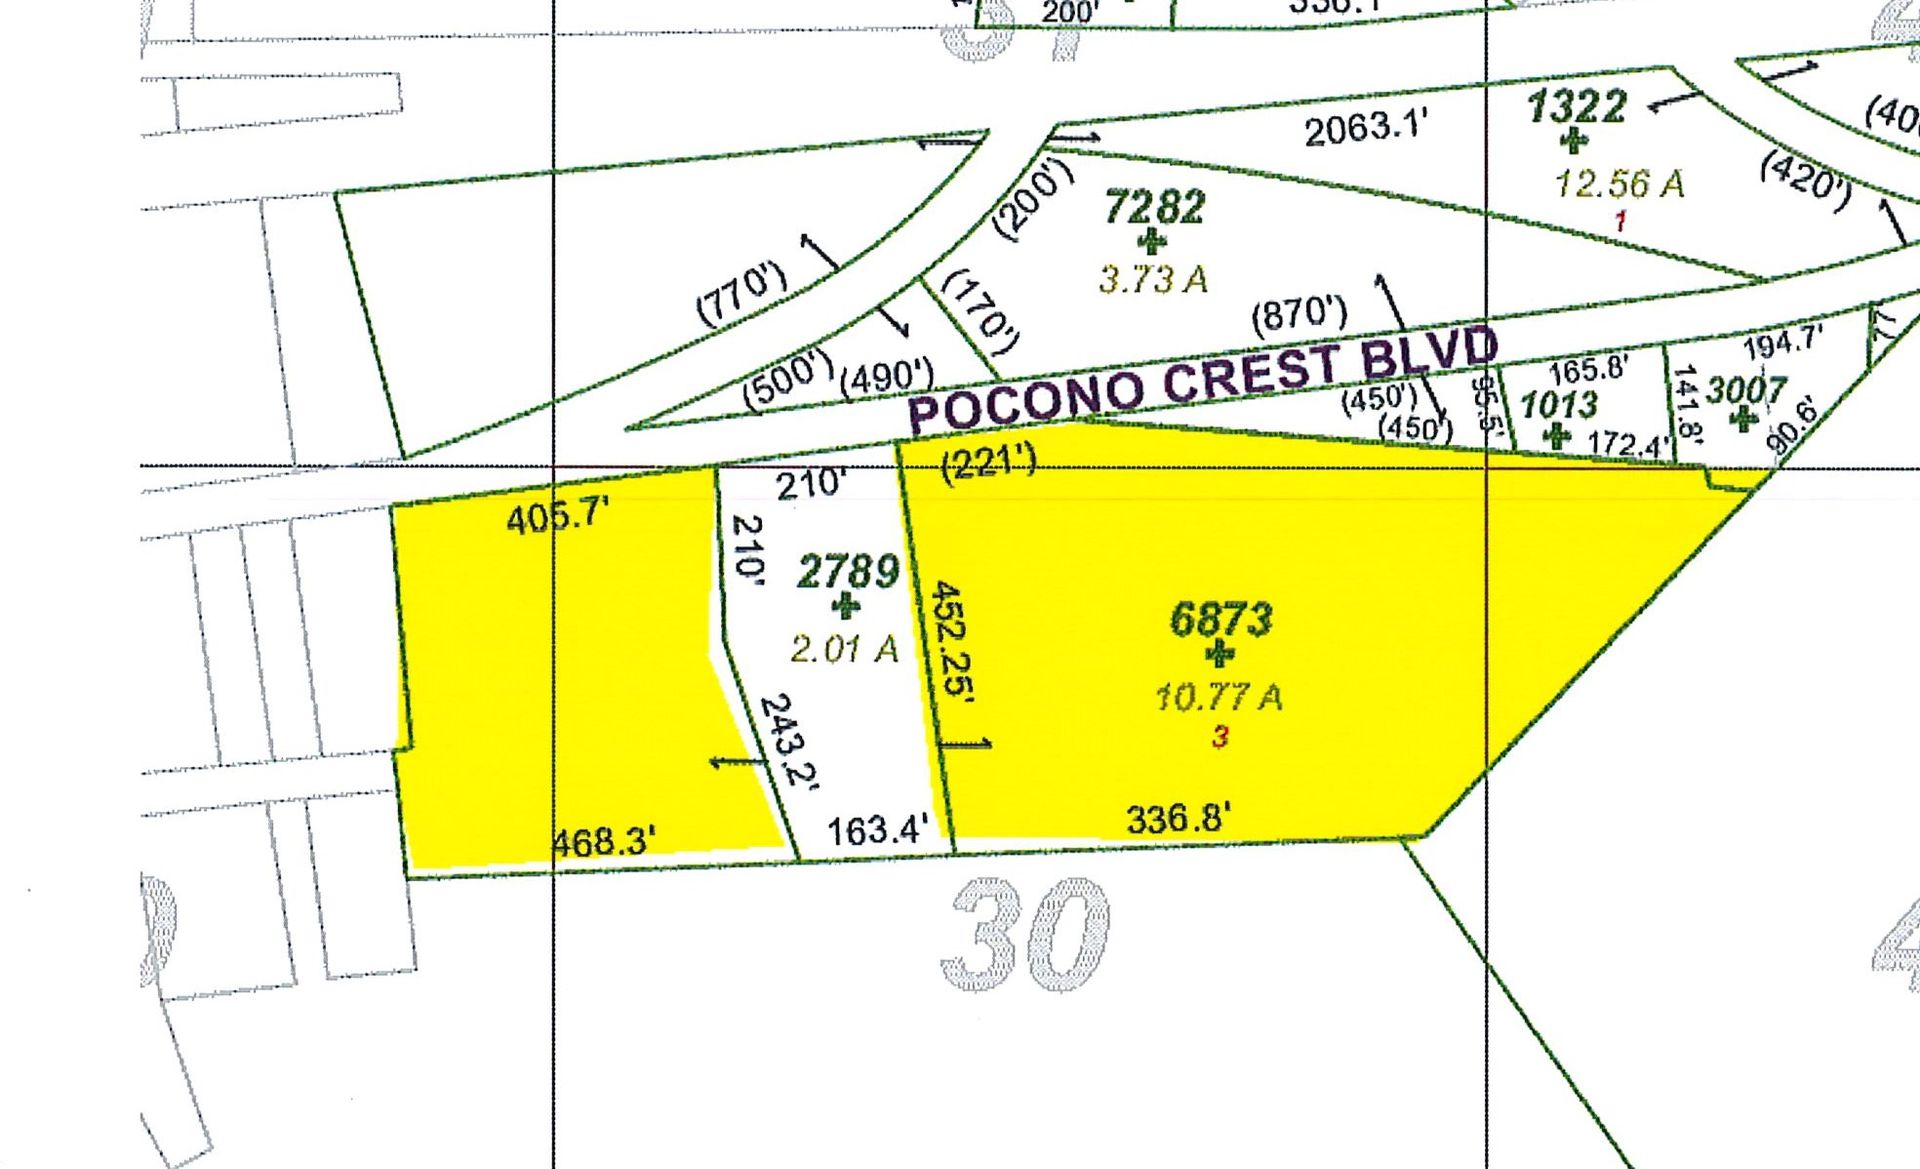 Beautiful Area with 10+ Acres. Great place to build your perfect custom home. Conveniently located where you can enjoy the best of every season the Poconos have to offer. Property consists of two tracts that are not contiguous (see map). CHECK OUT THE TAXES!! ($19 YEAR!!)   ASKING PRICE:  $229,900   PM-113512